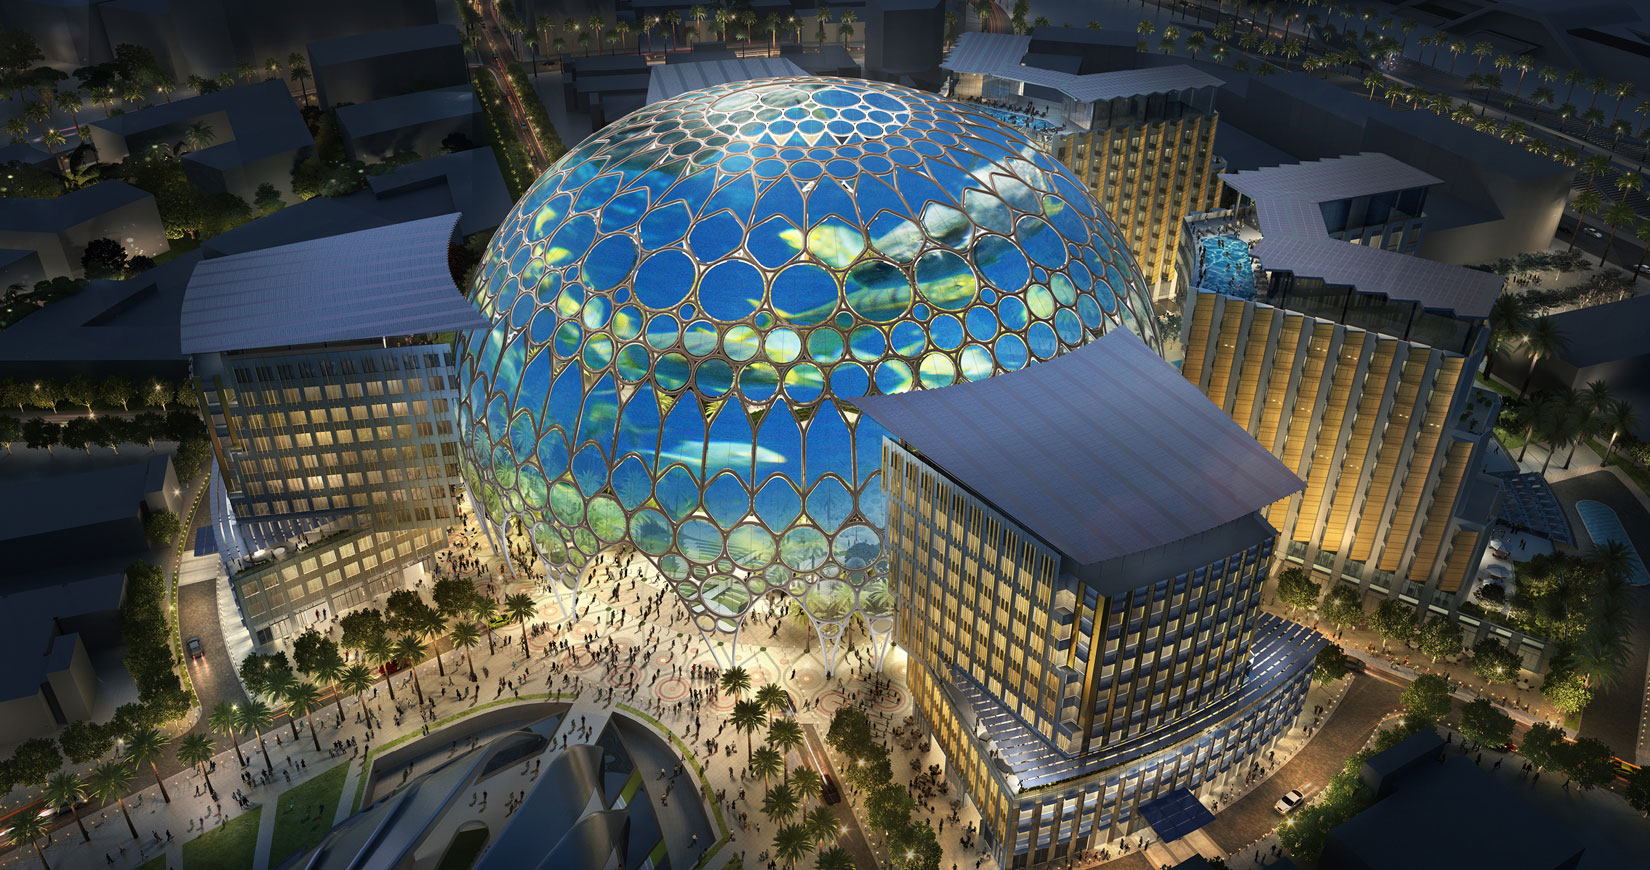 Expo 2020 Dubai has unveiled two stunning attractions